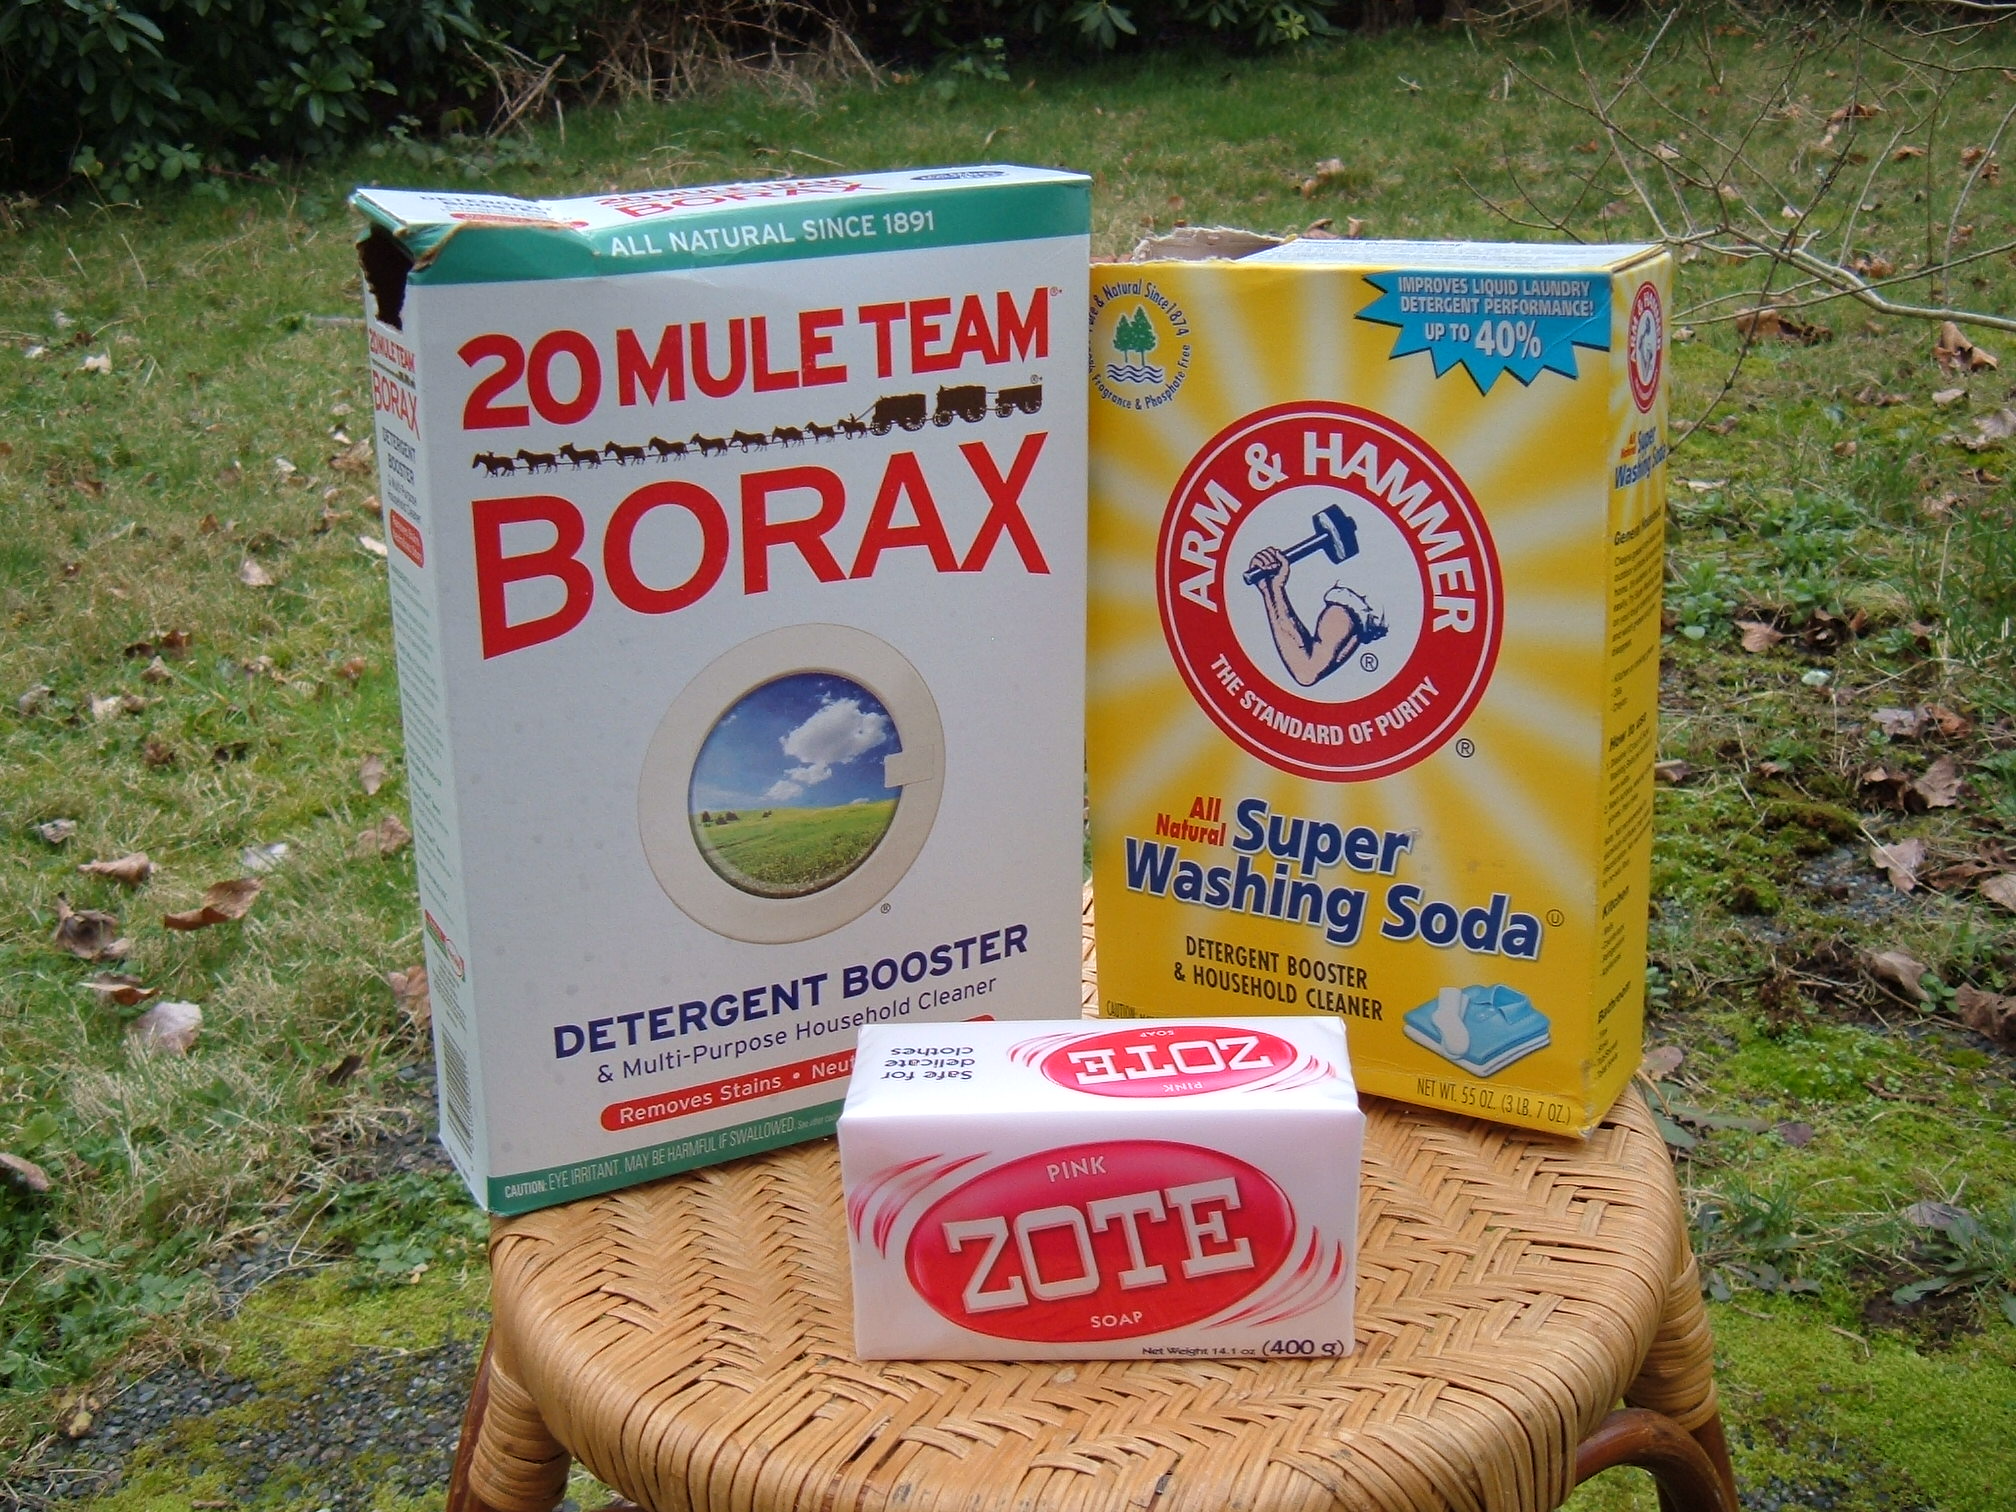 Another laundry detergent recipe with Zote musings from Marlin